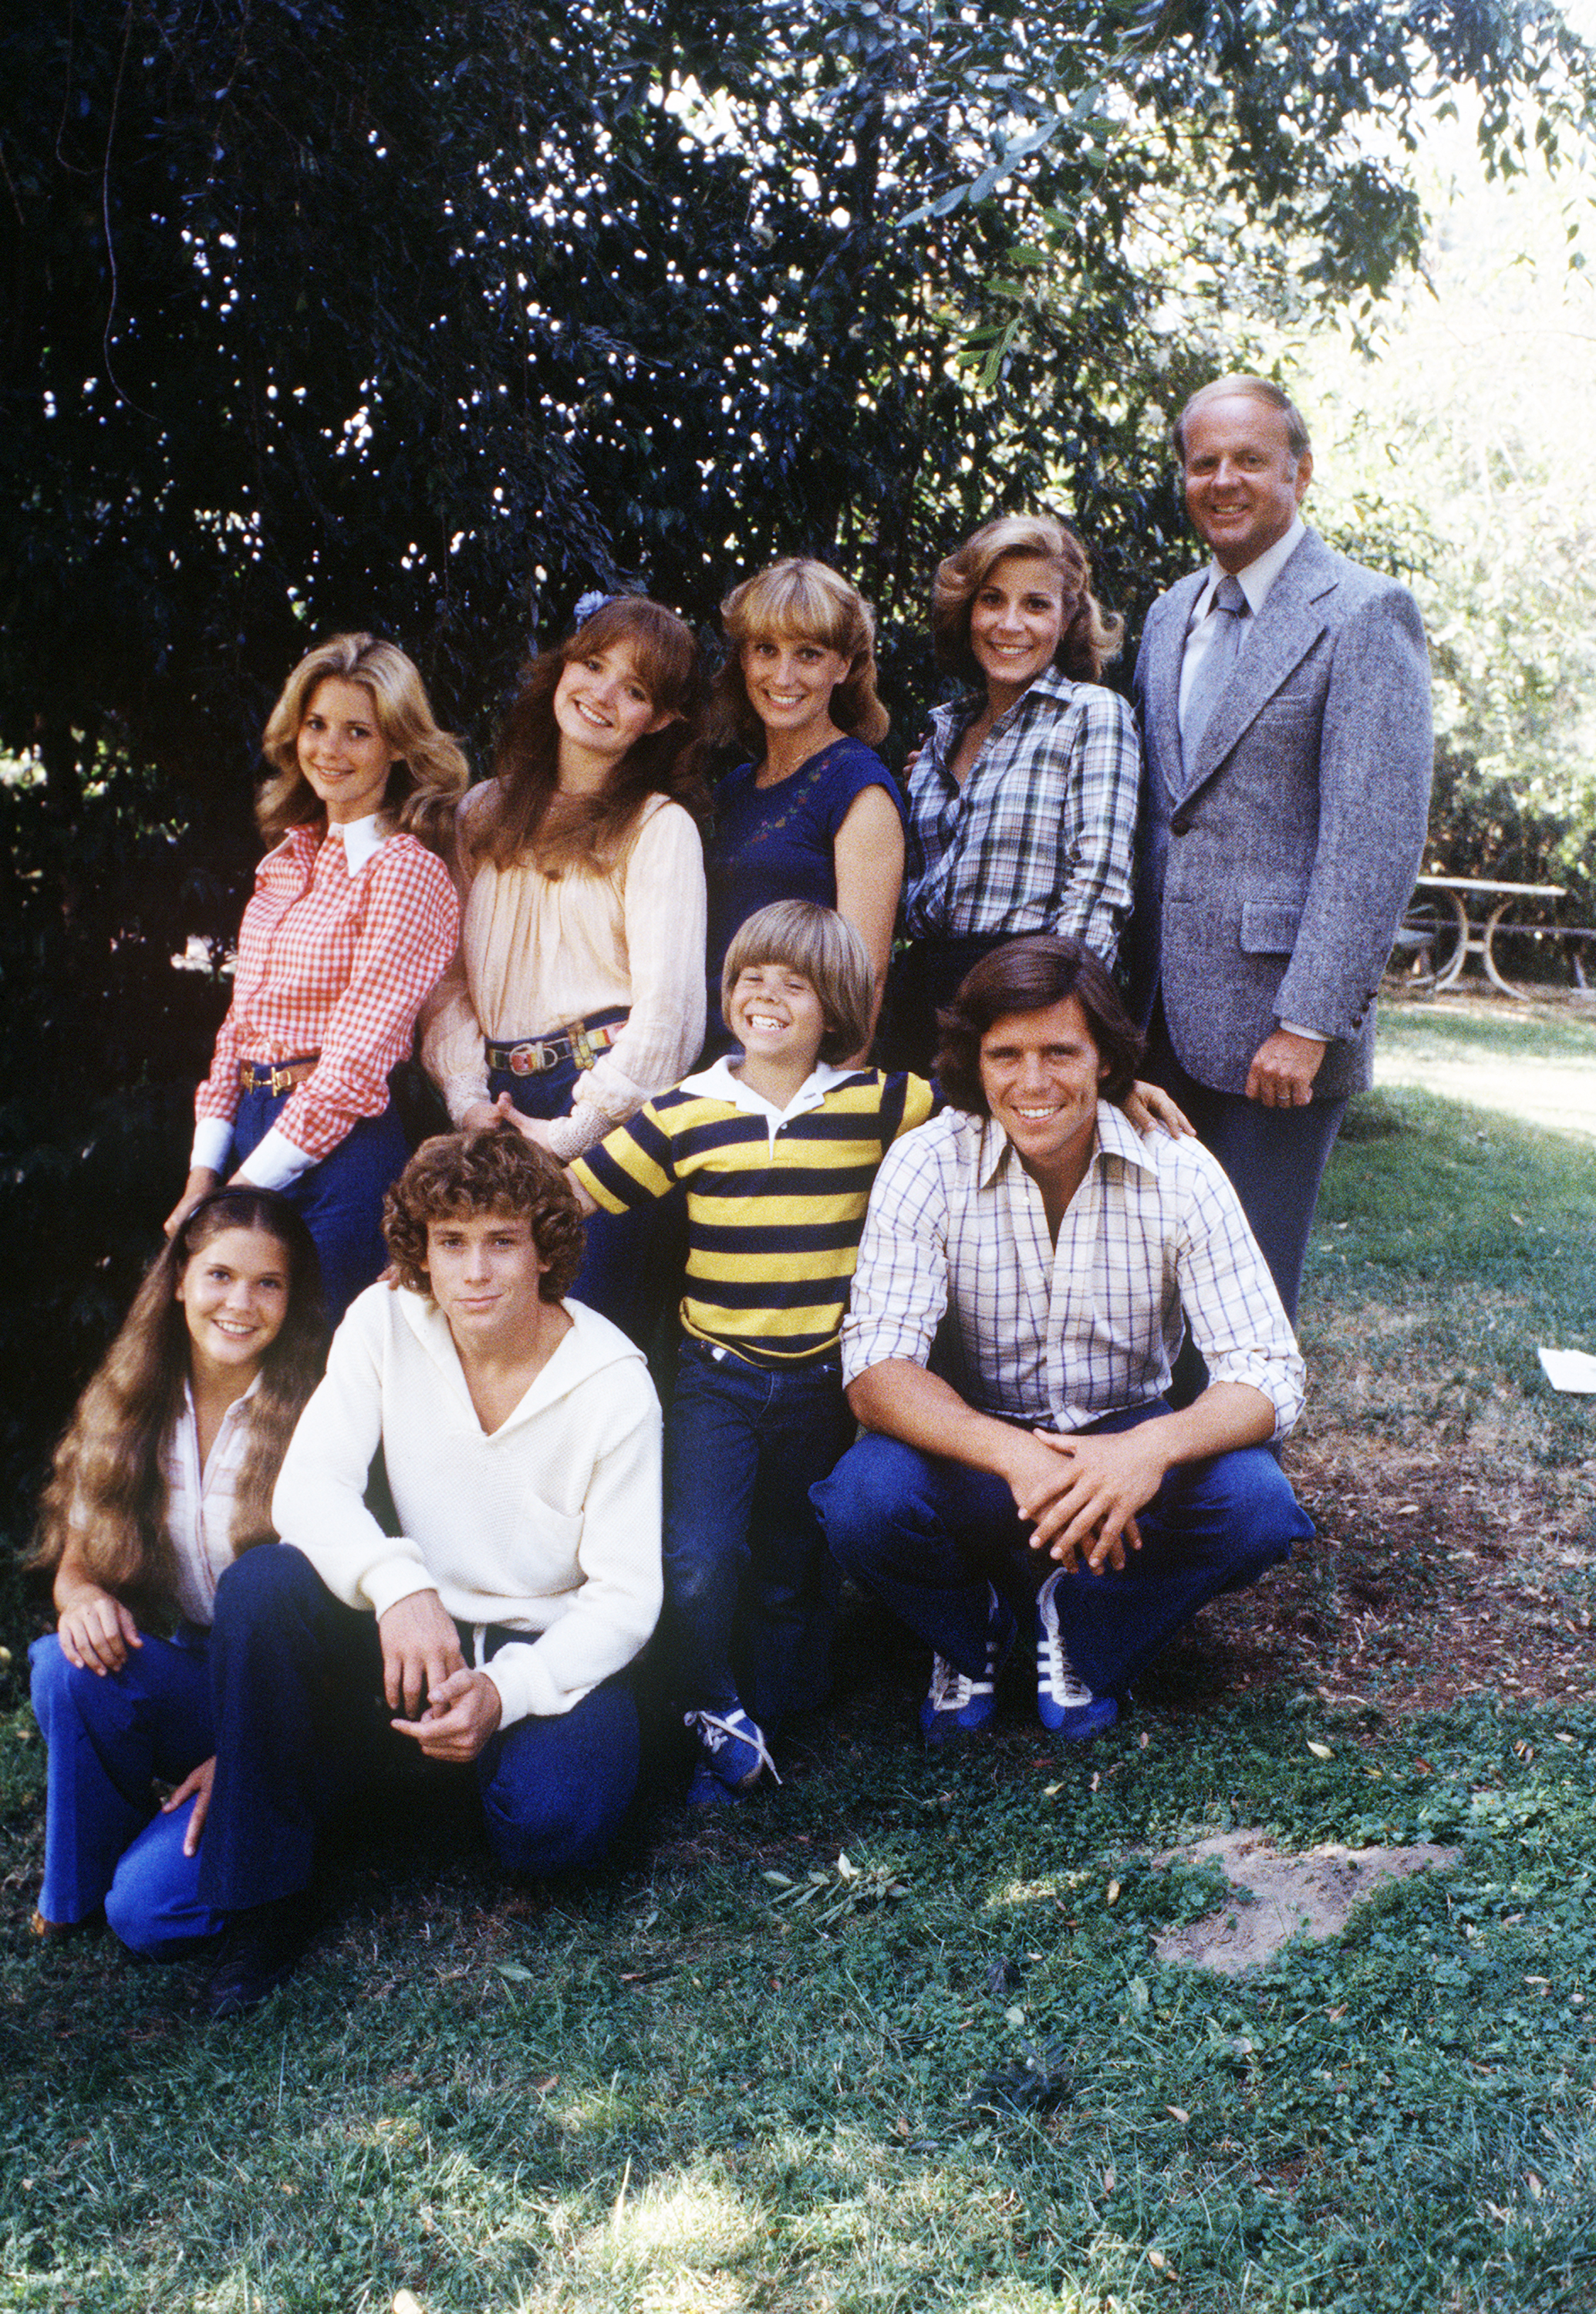 Dianne Kay, Susan Richardson, Laurie Walters, Lani O'Grady, Dick Van Patten, Connie Needham, Willie Aames, Adam Rich, and Grant Goodeve as their characters from "Eight Is Enough" in 1977 | Source: Getty Images